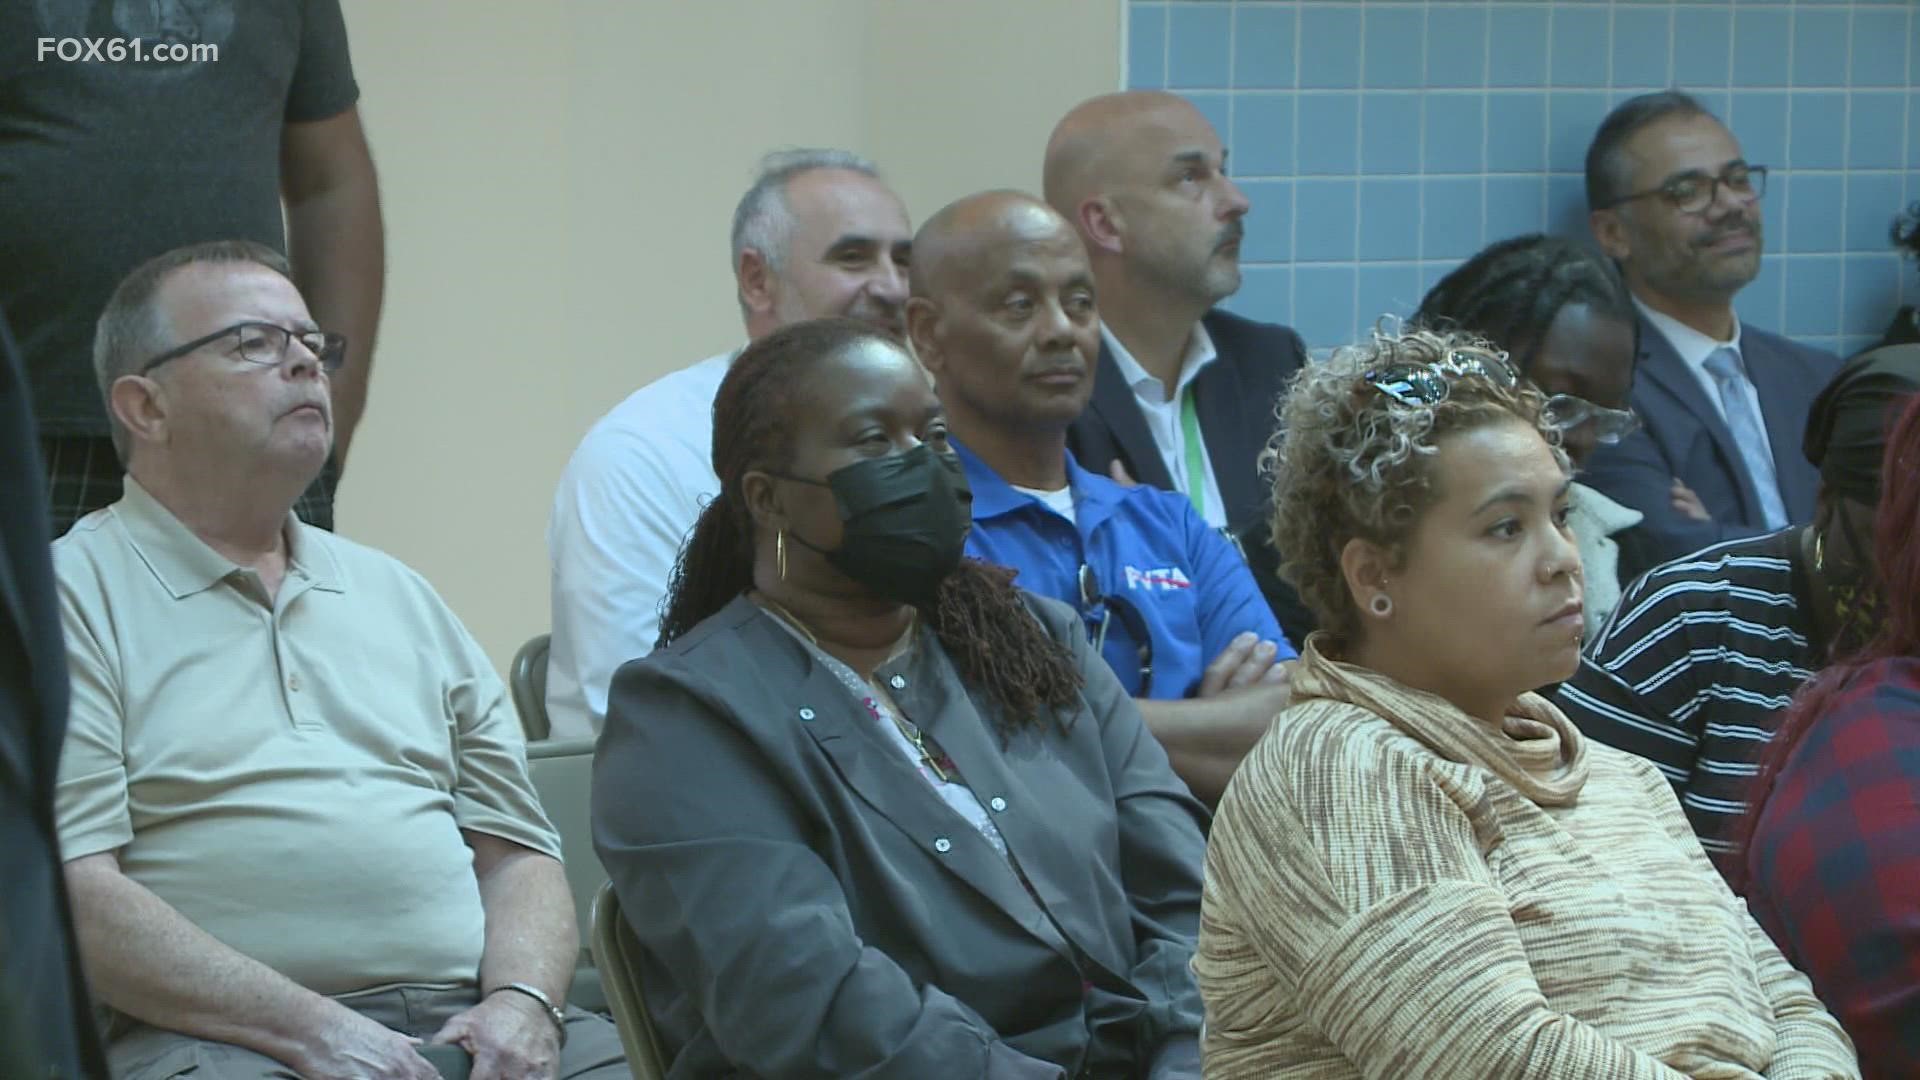 Parents discussed their frustrations with school buses causing problems for families.